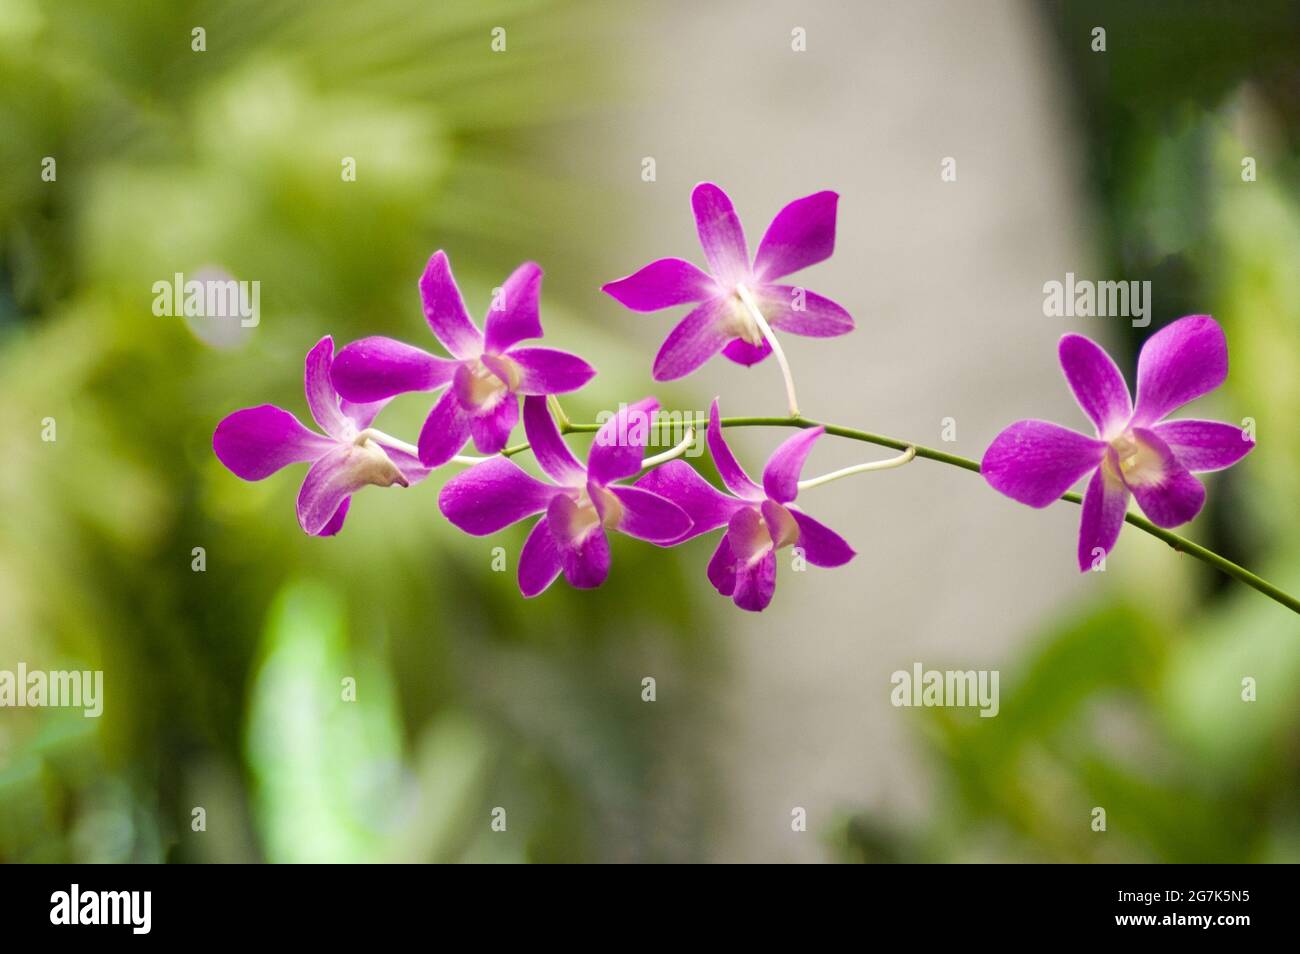 Selective focus shot of pink epidendrum orchids on a greenish background Stock Photo